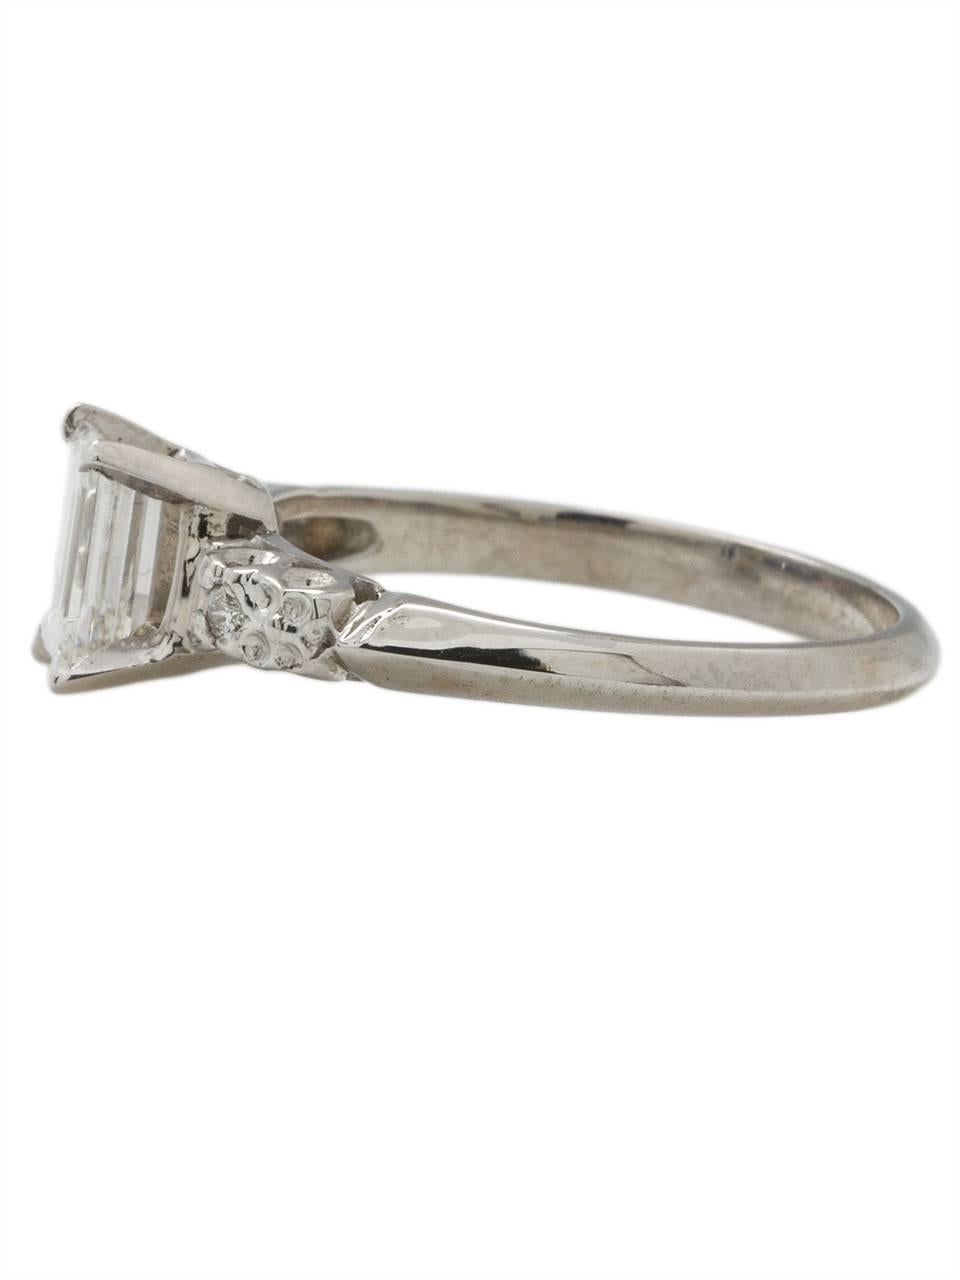 
Classic 1950s platinum engagement ring featuring a bright and lively EGL certified  0.63ct emerald cut, G-VS1. A softly  curved knife edge shank is accented by open scroll motiff galleries, and an elevated center setting, giving the stone maximum